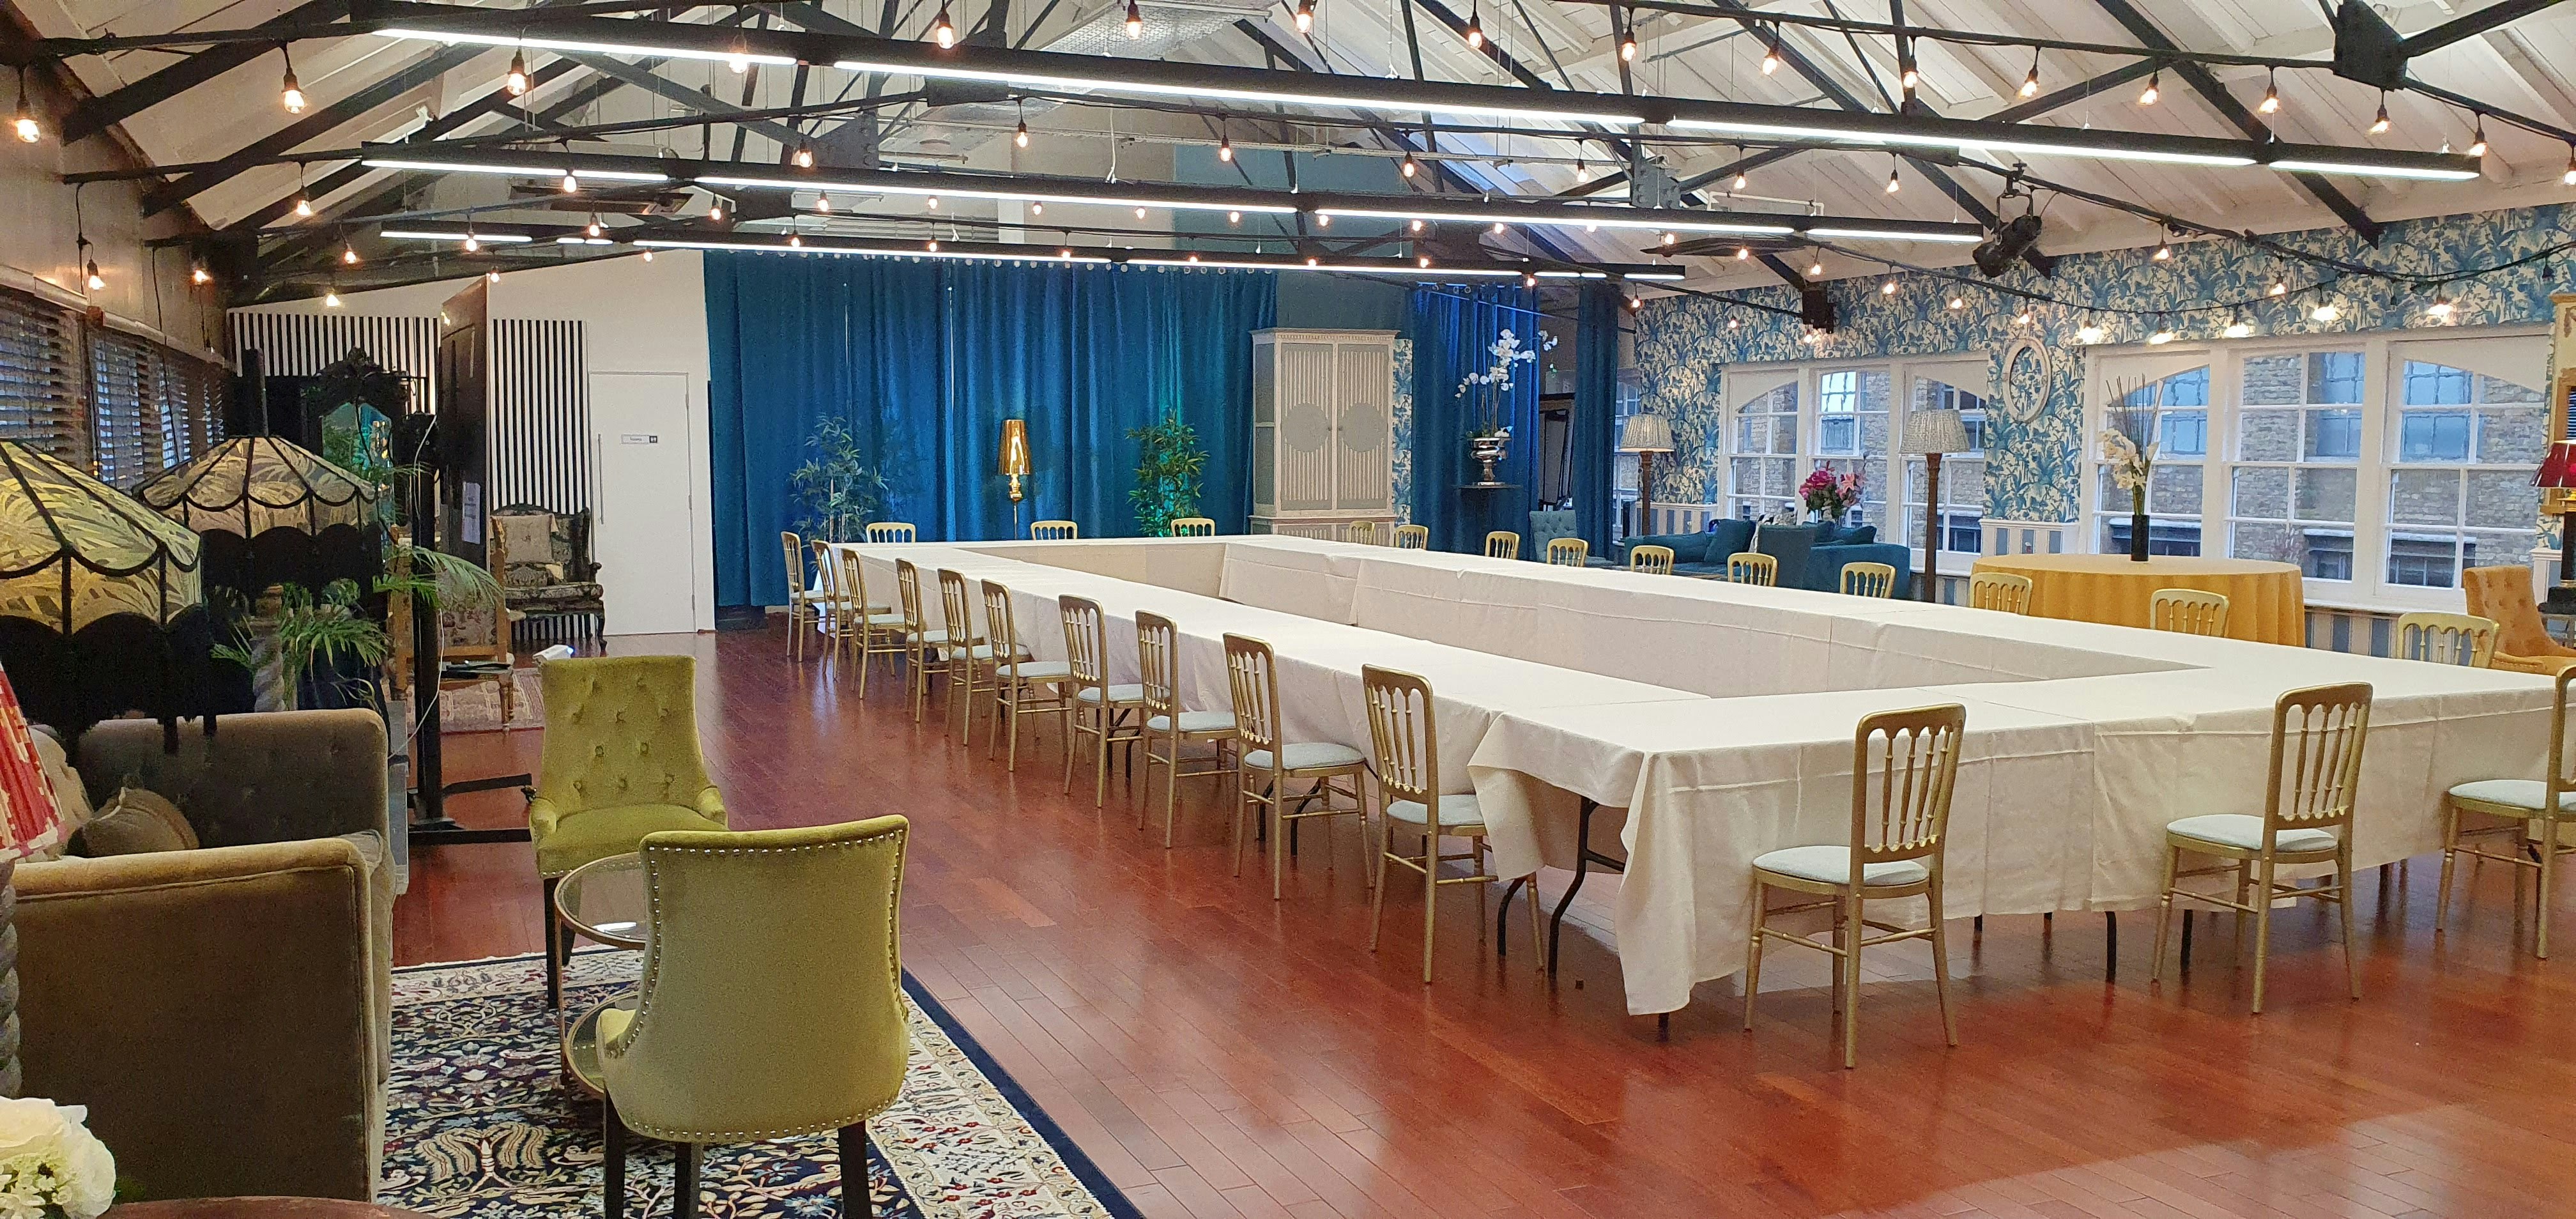 Cheap Conference Venues in London - Lumiere Underwood